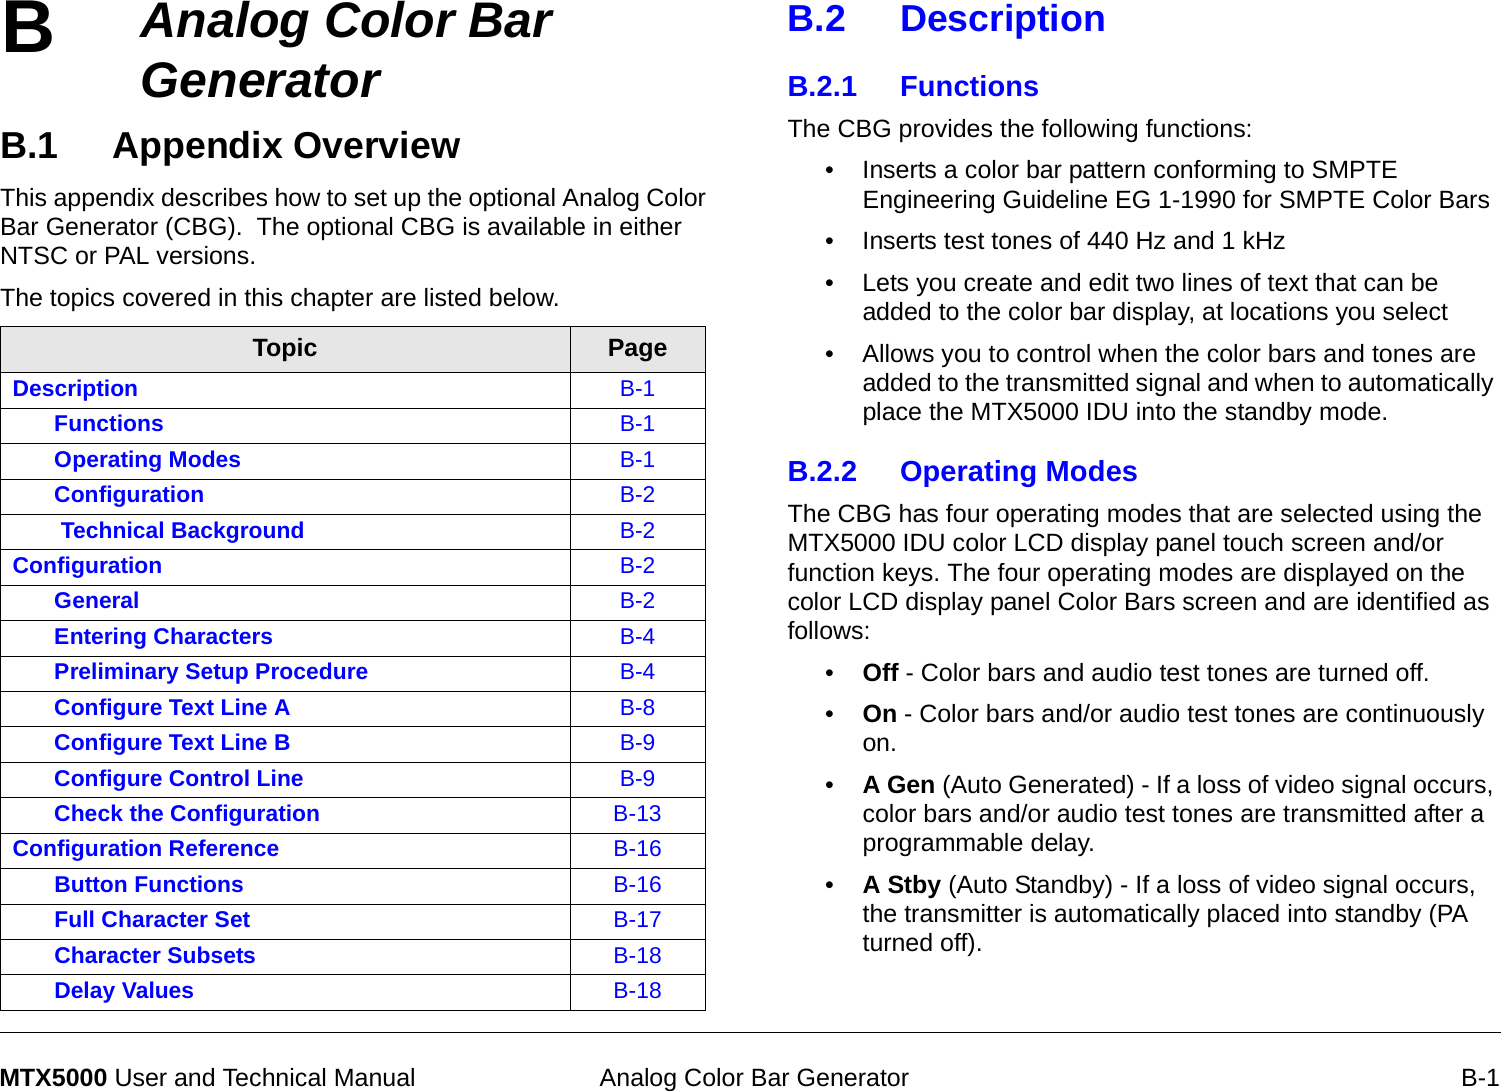 B Analog Color Bar Generator B-1MTX5000 User and Technical ManualAnalog Color Bar GeneratorB.1 Appendix Overview   This appendix describes how to set up the optional Analog Color Bar Generator (CBG).  The optional CBG is available in either NTSC or PAL versions.The topics covered in this chapter are listed below. Topic PageDescription B-1Functions B-1Operating Modes B-1Configuration  B-2 Technical Background B-2Configuration B-2General B-2Entering Characters B-4Preliminary Setup Procedure B-4Configure Text Line A B-8Configure Text Line B B-9Configure Control Line B-9Check the Configuration B-13Configuration Reference B-16Button Functions B-16Full Character Set B-17Character Subsets B-18Delay Values B-18B.2 DescriptionB.2.1 FunctionsThe CBG provides the following functions:• Inserts a color bar pattern conforming to SMPTE Engineering Guideline EG 1-1990 for SMPTE Color Bars • Inserts test tones of 440 Hz and 1 kHz• Lets you create and edit two lines of text that can be added to the color bar display, at locations you select• Allows you to control when the color bars and tones are added to the transmitted signal and when to automatically place the MTX5000 IDU into the standby mode.B.2.2 Operating ModesThe CBG has four operating modes that are selected using the MTX5000 IDU color LCD display panel touch screen and/or function keys. The four operating modes are displayed on the color LCD display panel Color Bars screen and are identified as follows:•Off - Color bars and audio test tones are turned off.•On - Color bars and/or audio test tones are continuously on.•A Gen (Auto Generated) - If a loss of video signal occurs, color bars and/or audio test tones are transmitted after a programmable delay. •A Stby (Auto Standby) - If a loss of video signal occurs, the transmitter is automatically placed into standby (PA turned off).